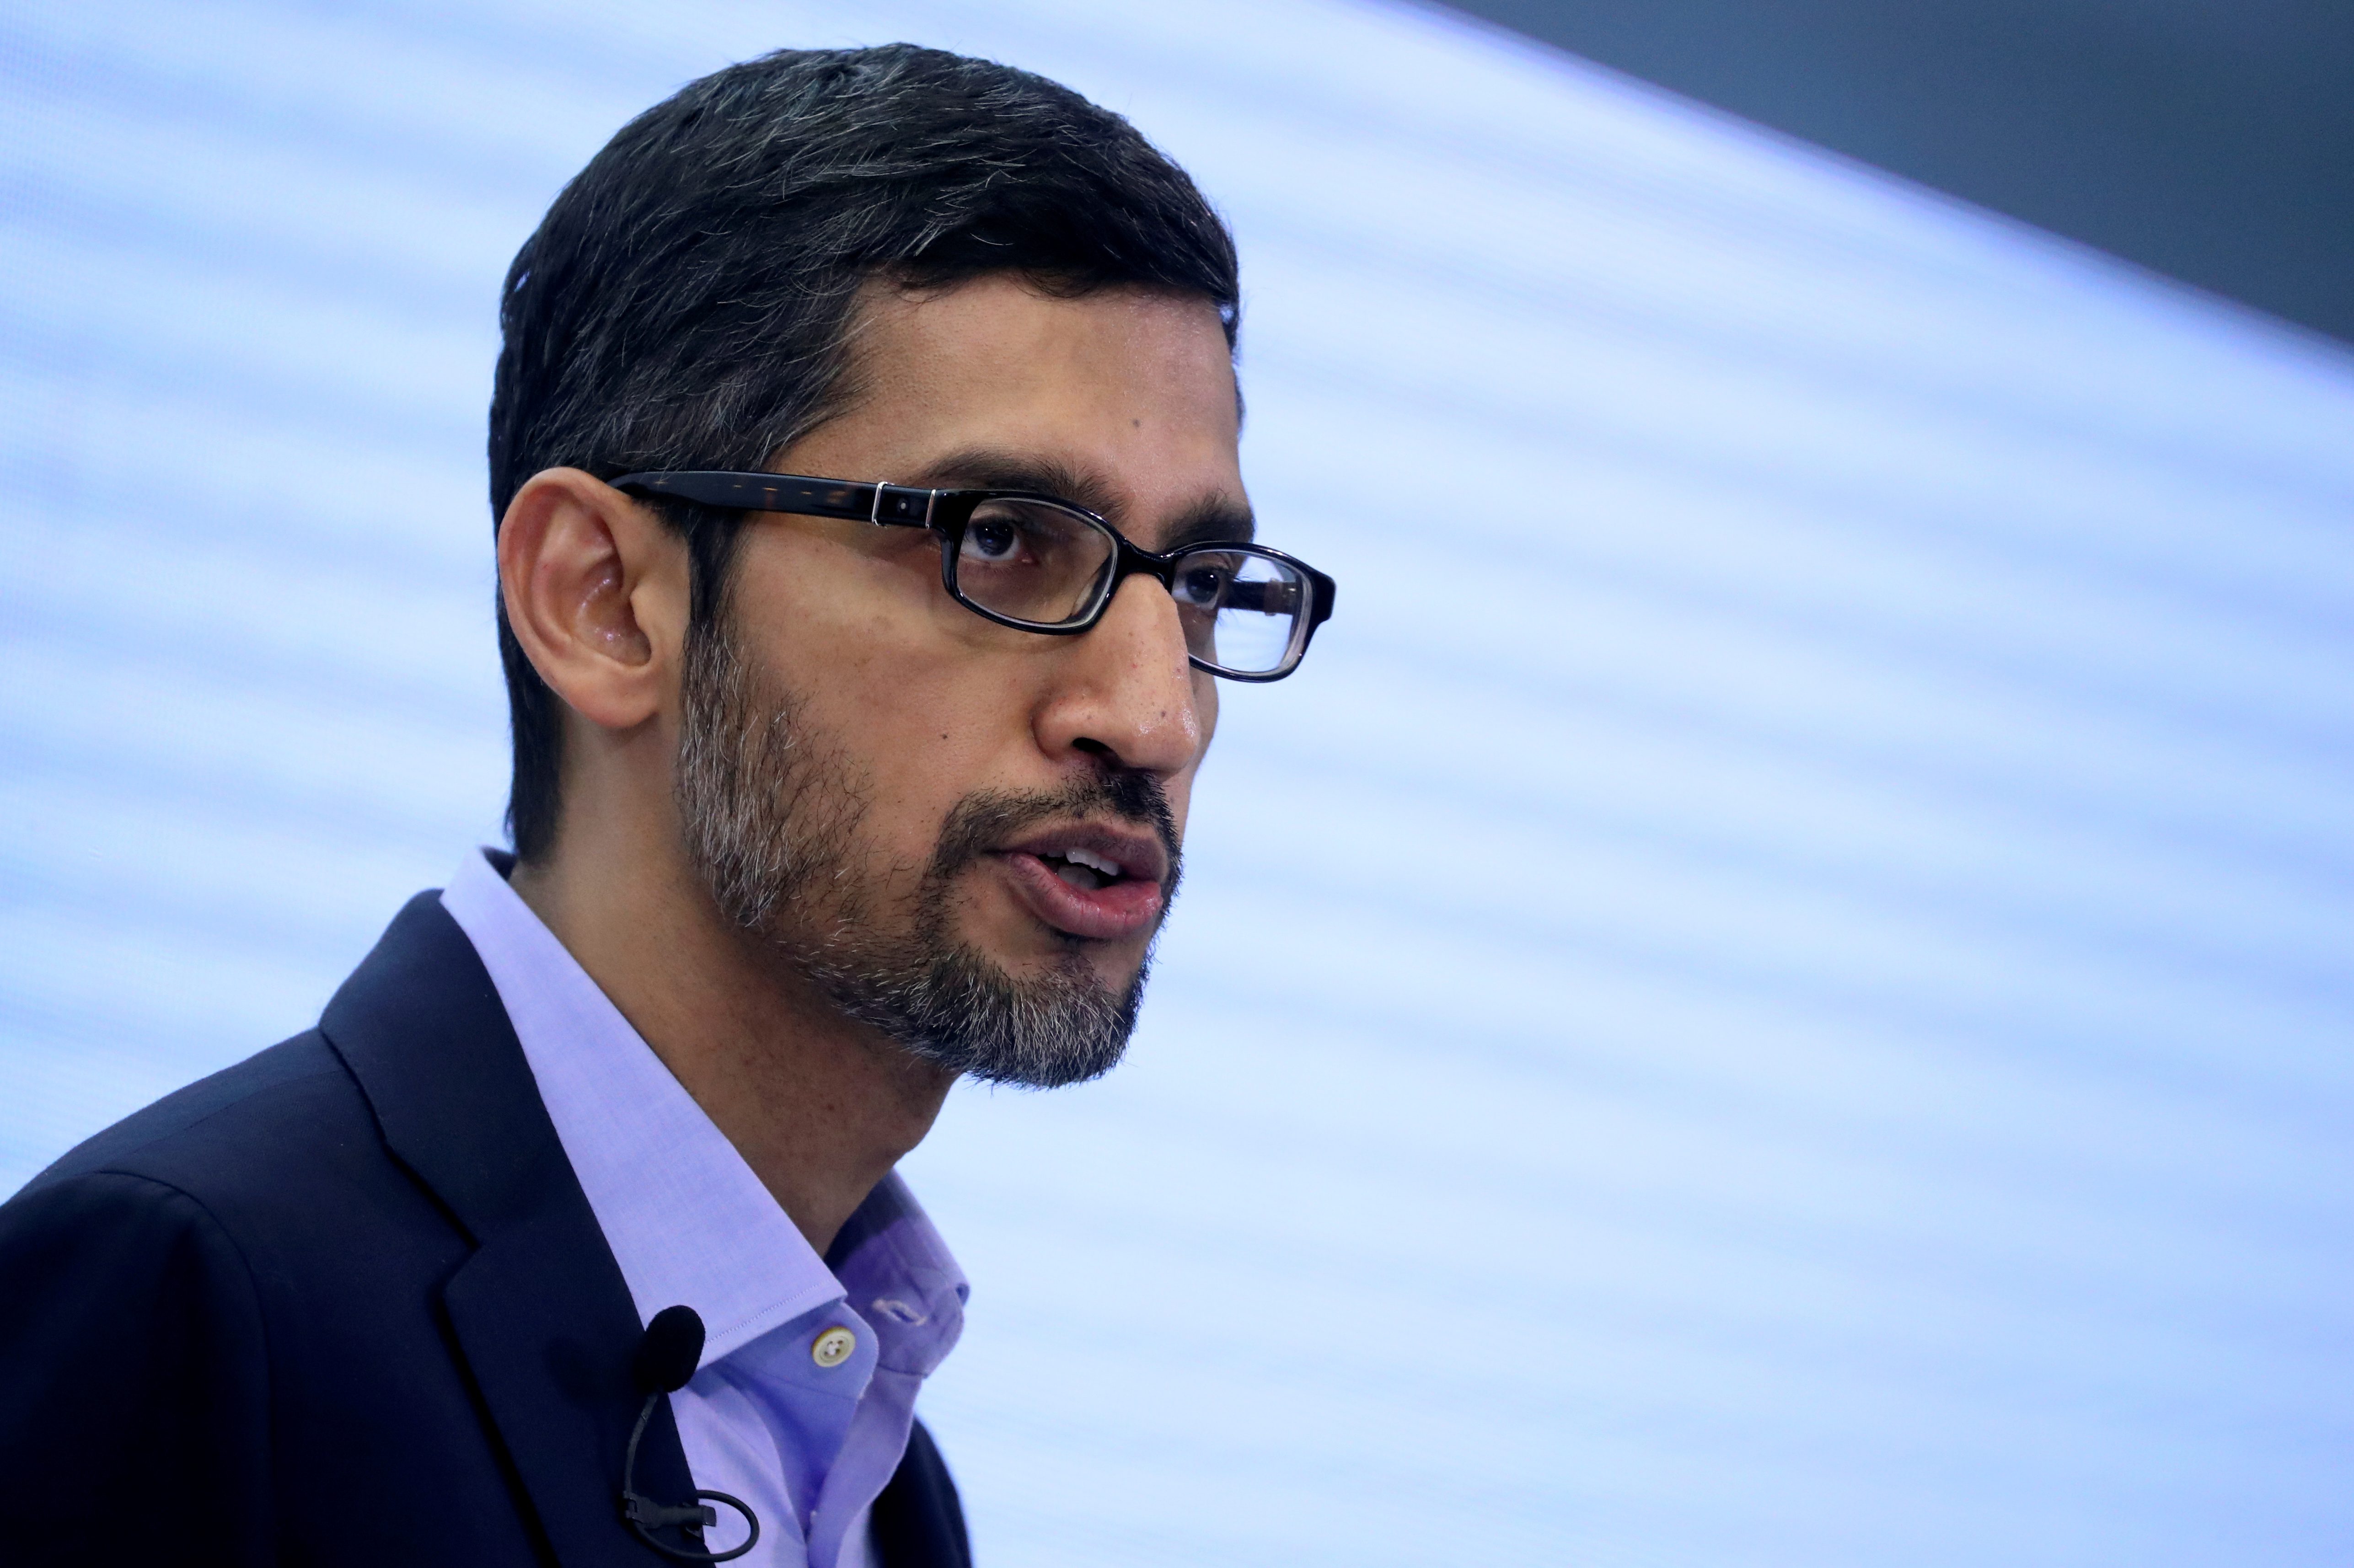 YouTube resists pressure to ban Trump channel, sticks with three strikes rule, Pichai says